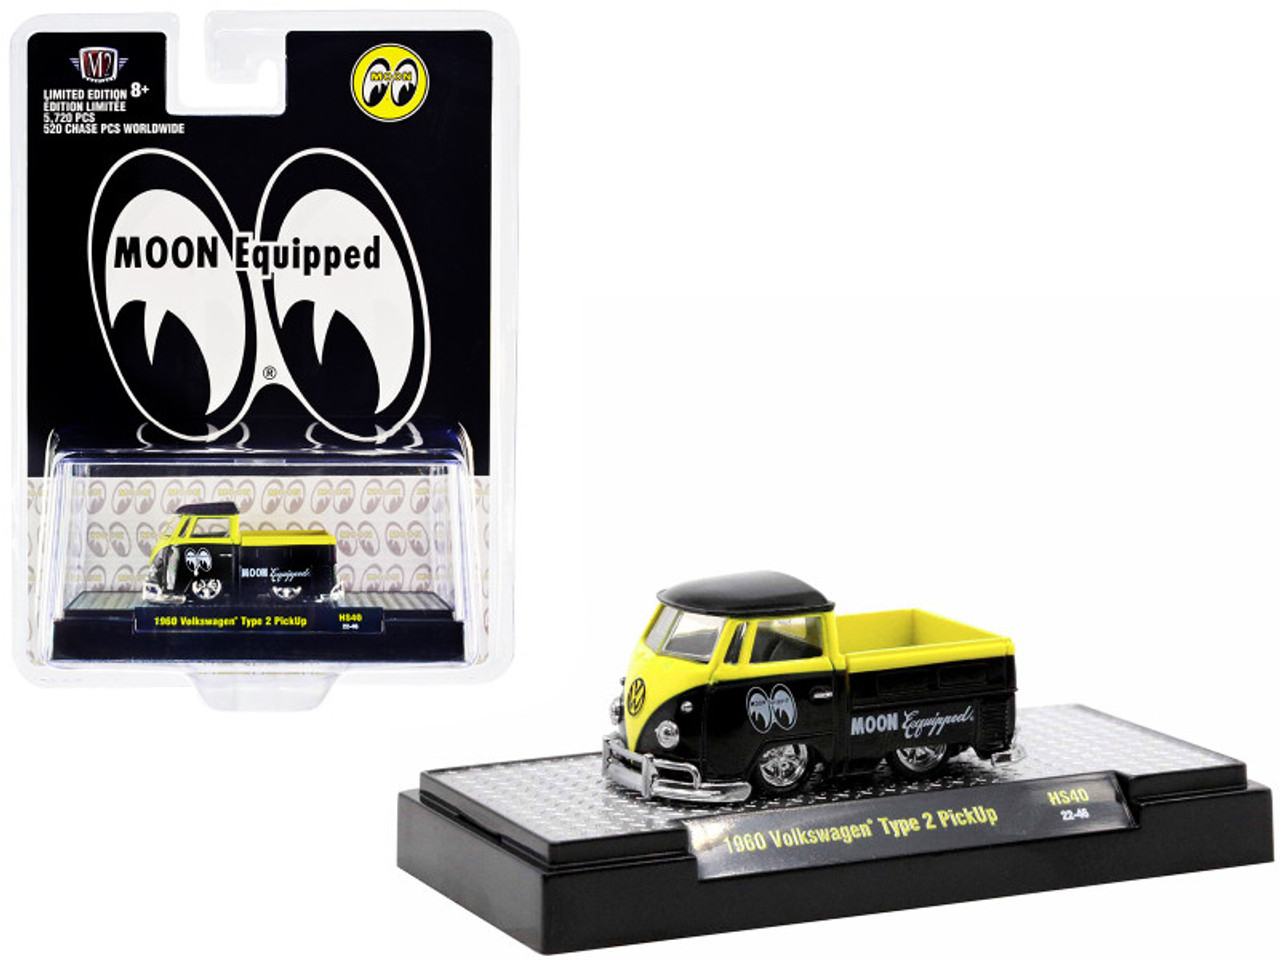 1960 Volkswagen Type 2 Pickup Truck Black and Bright Yellow "Mooneyes: Moon Equipped" Limited Edition to 5720 pieces Worldwide 1/64 Diecast Model Car by M2 Machine